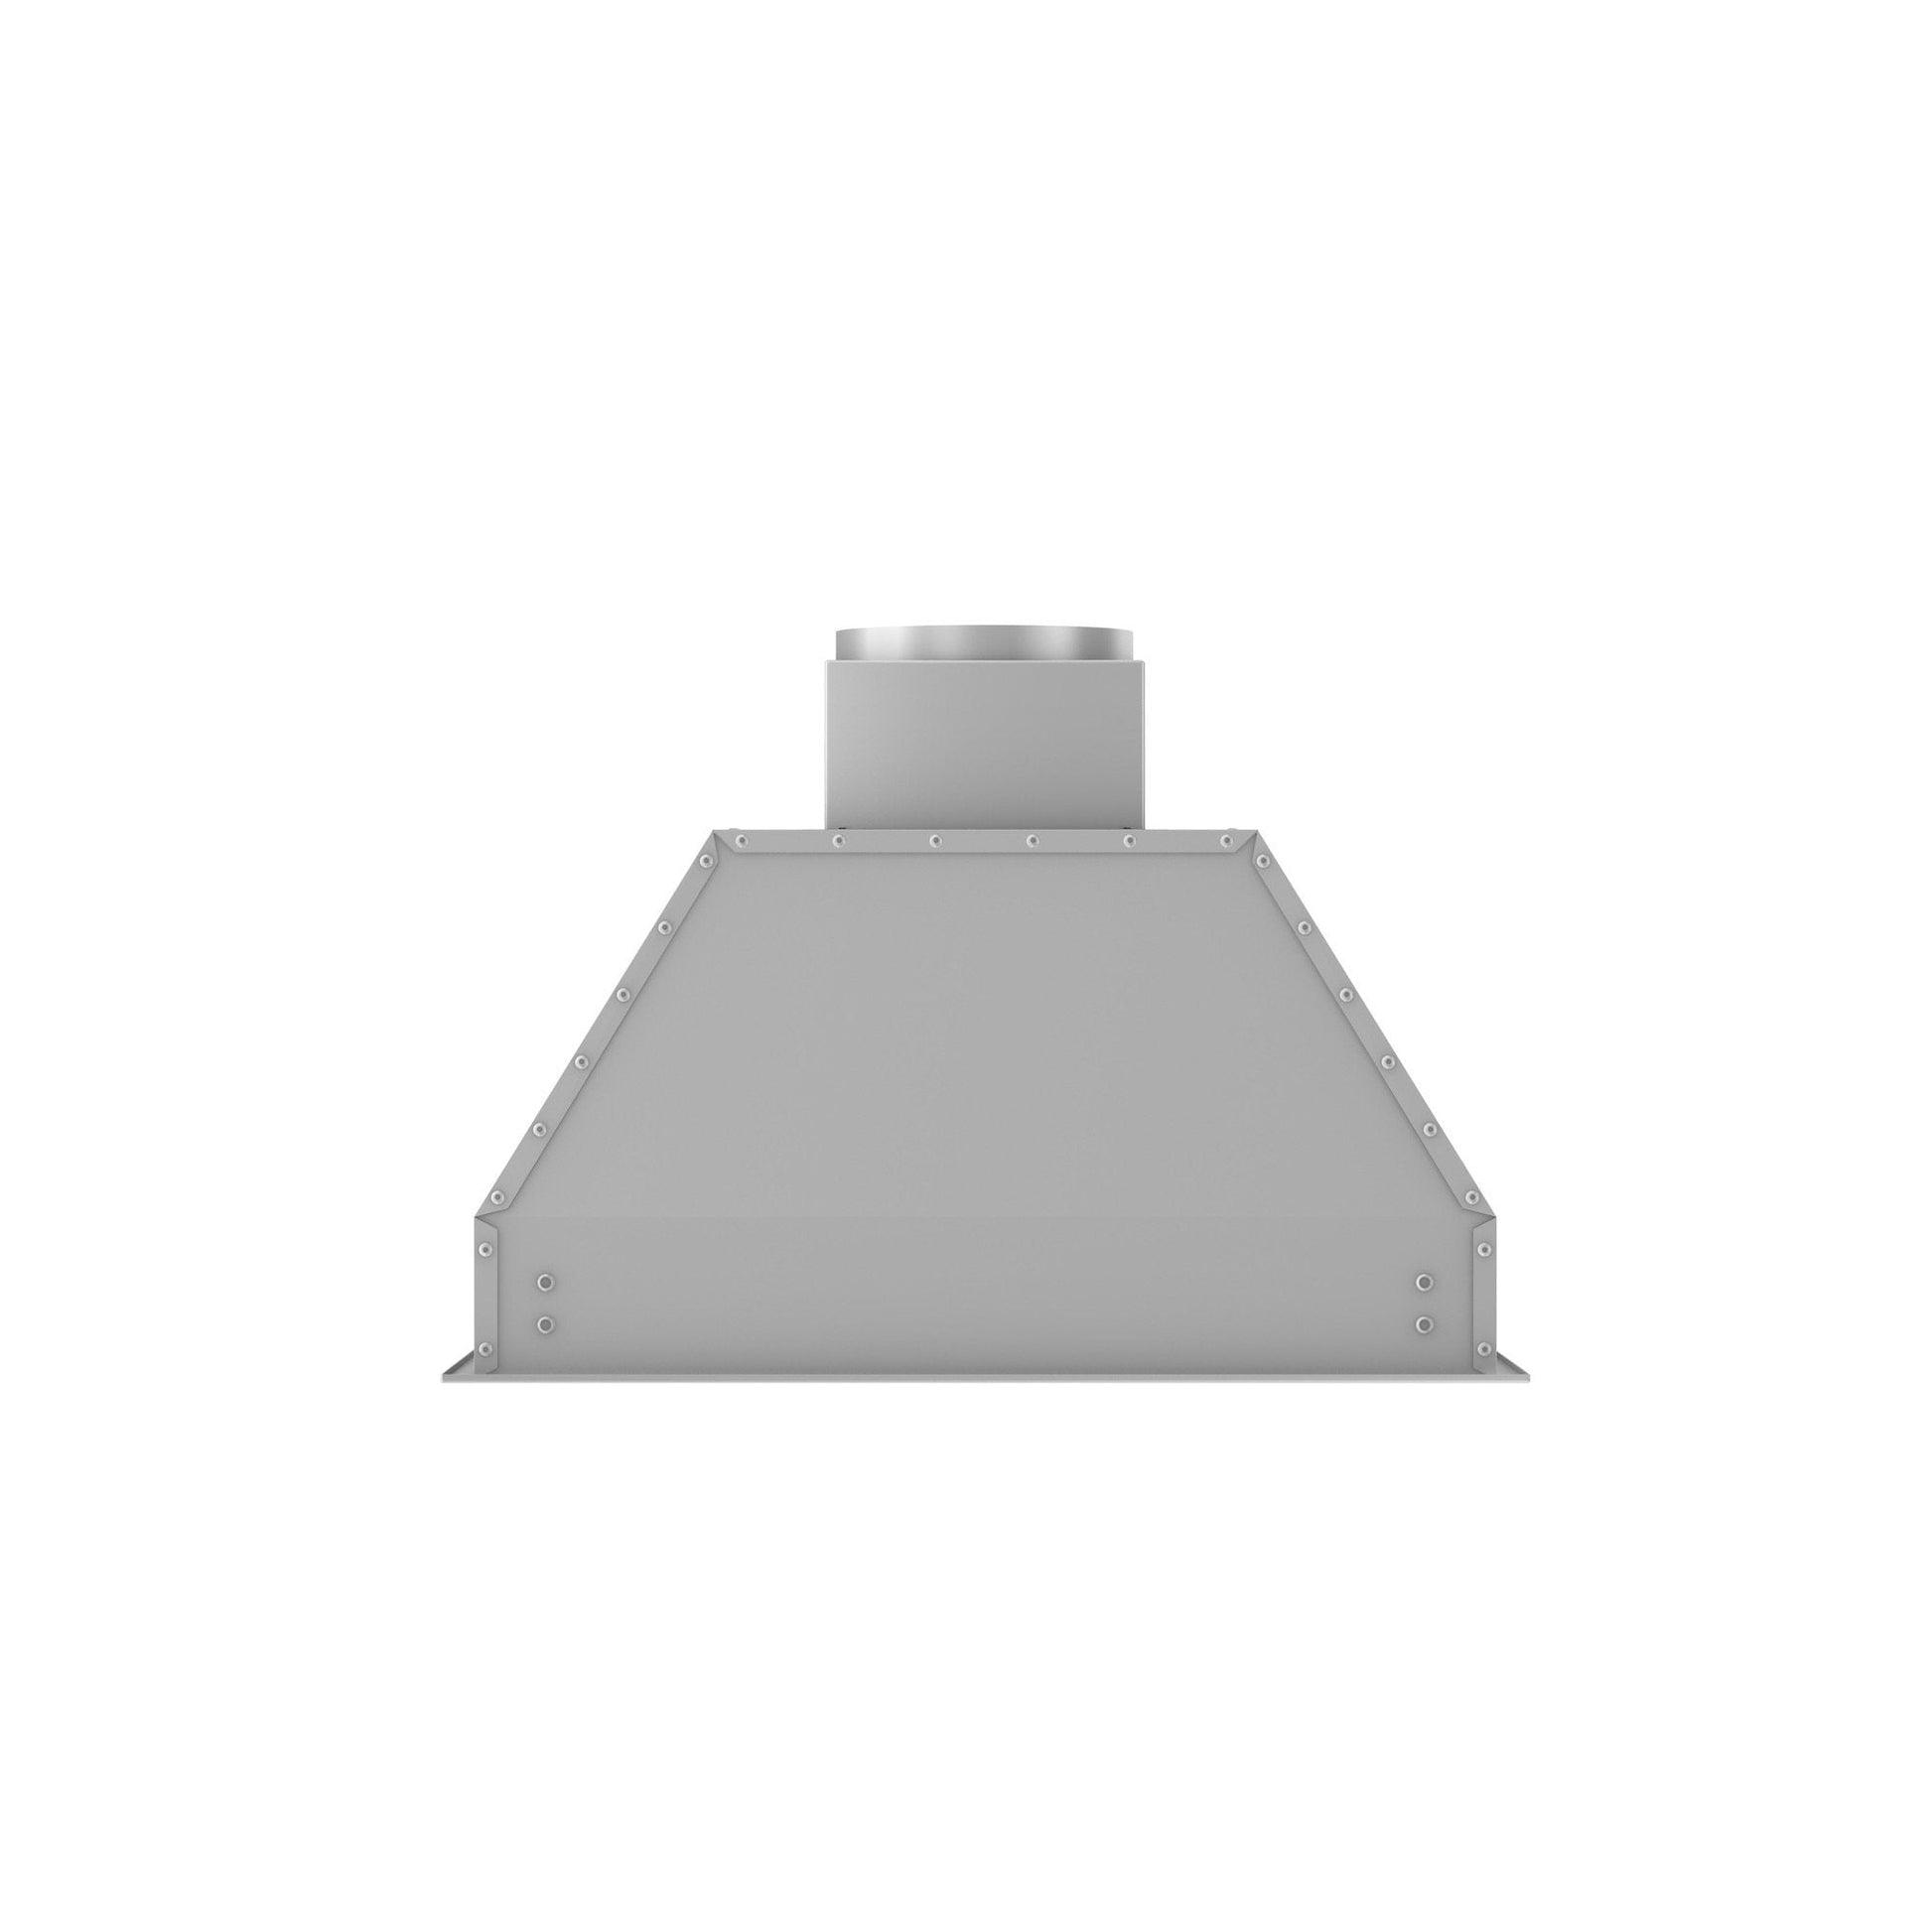 ZLINE Ducted Wall Mount Range Hood Insert in Outdoor Approved - Stainless Steel